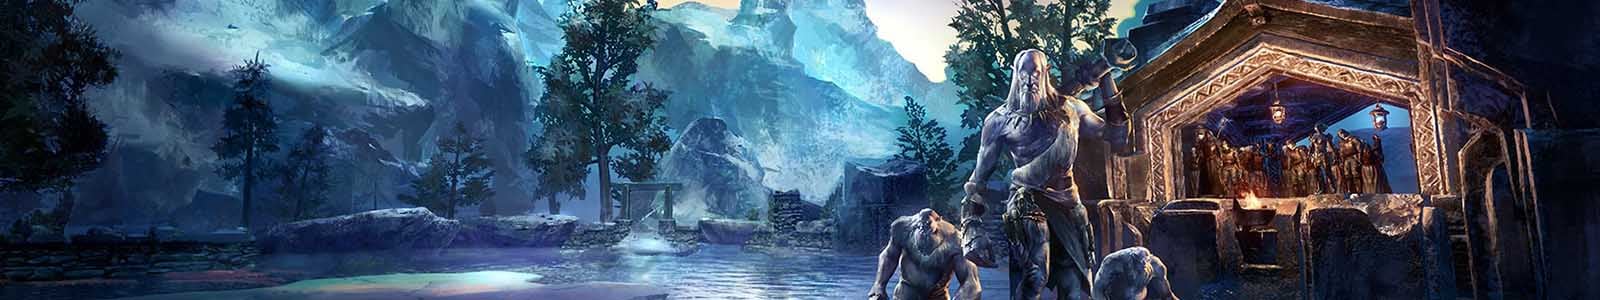 Perfected Wrath of Elements Set - ESO header